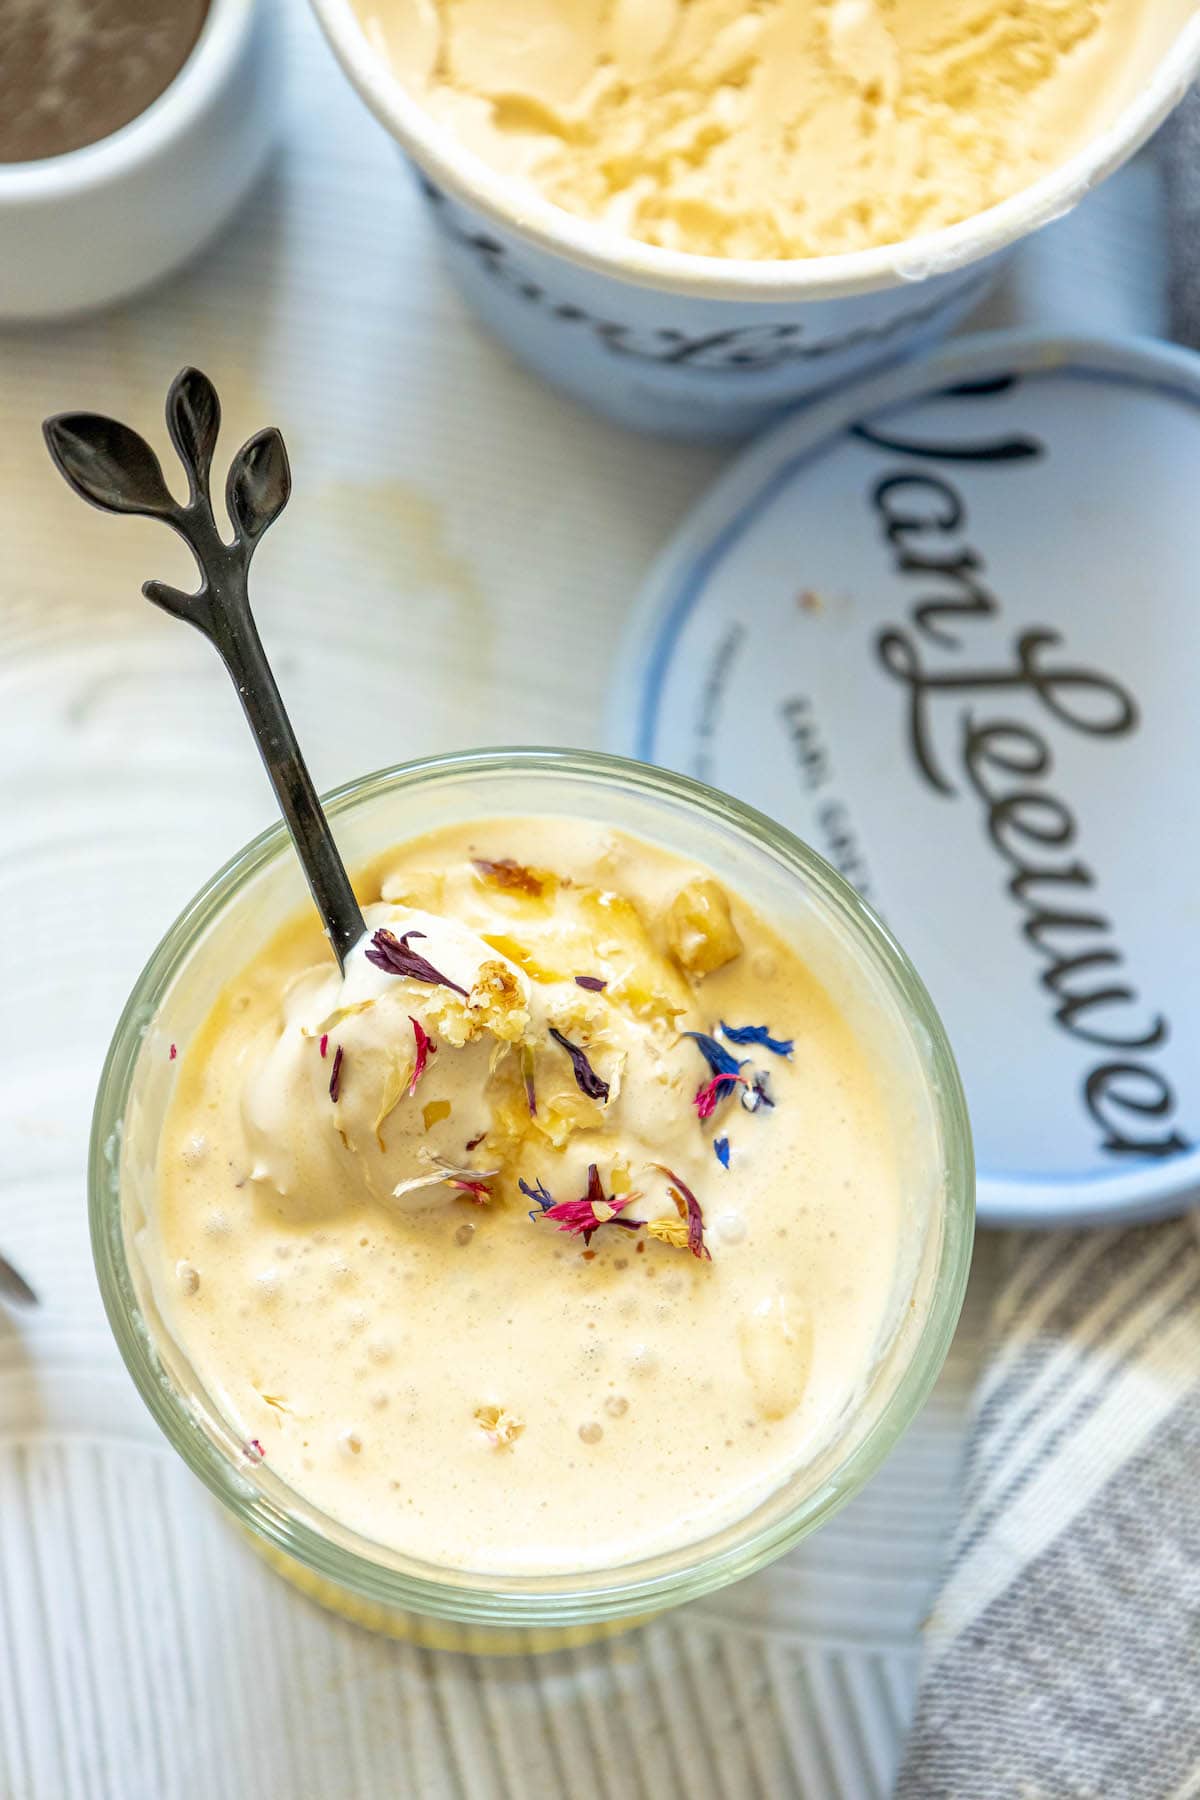 picture of earl grey affogato in a glass mug with corn flowers on top